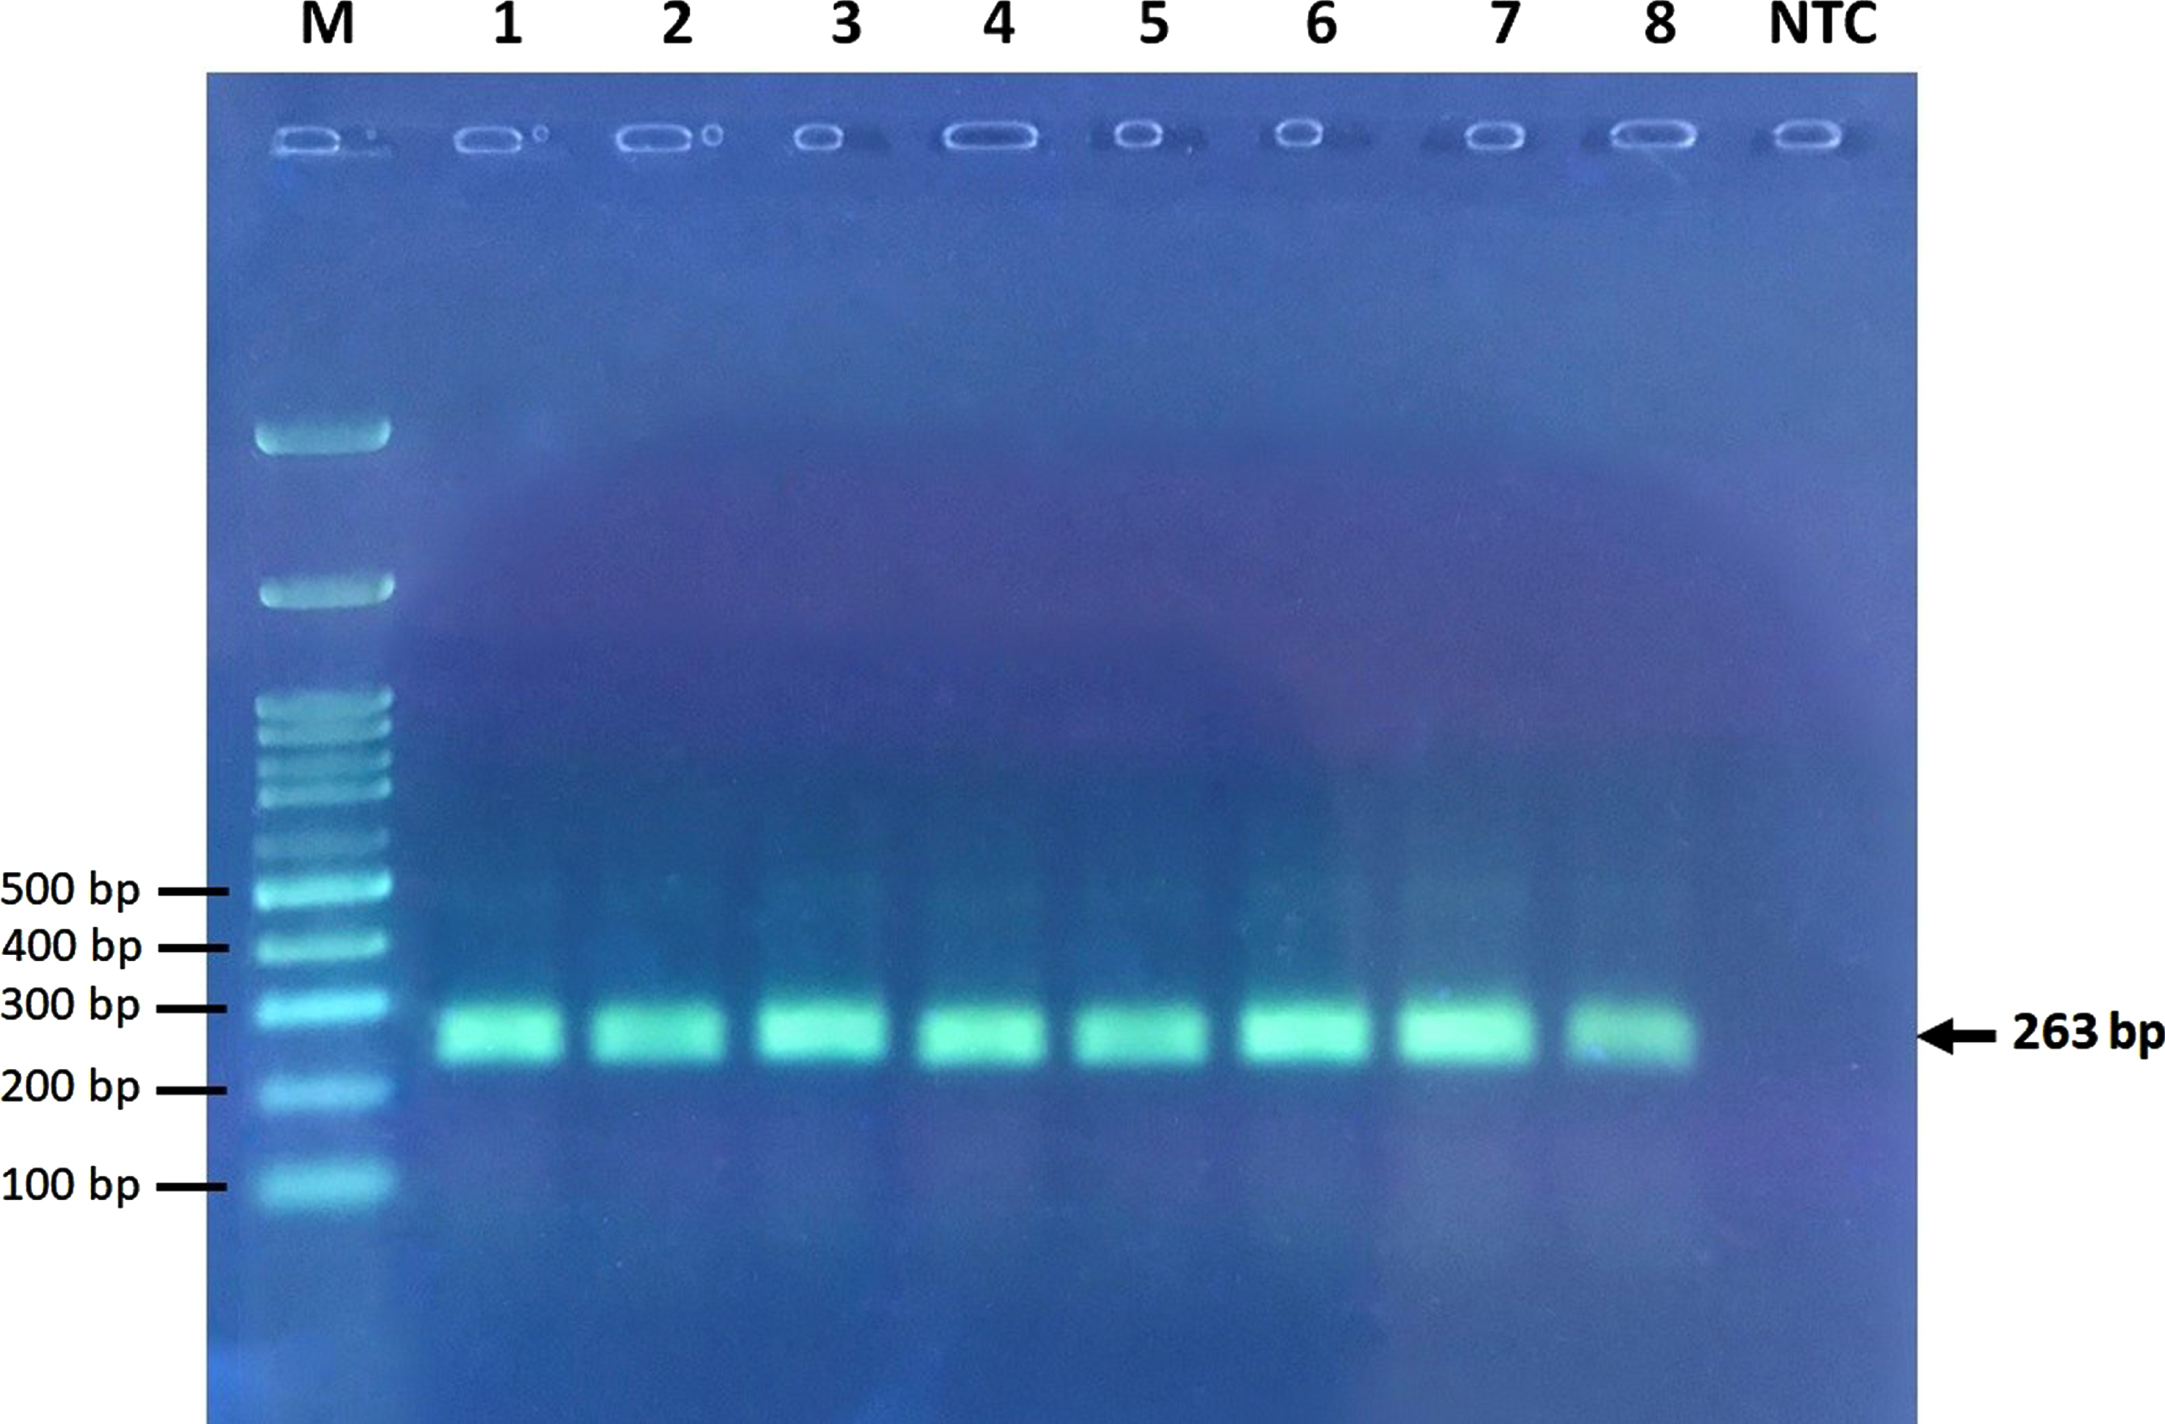 Electrophoresis of undigested PCR products. M, marker ladder; NTC, no template control ladder.